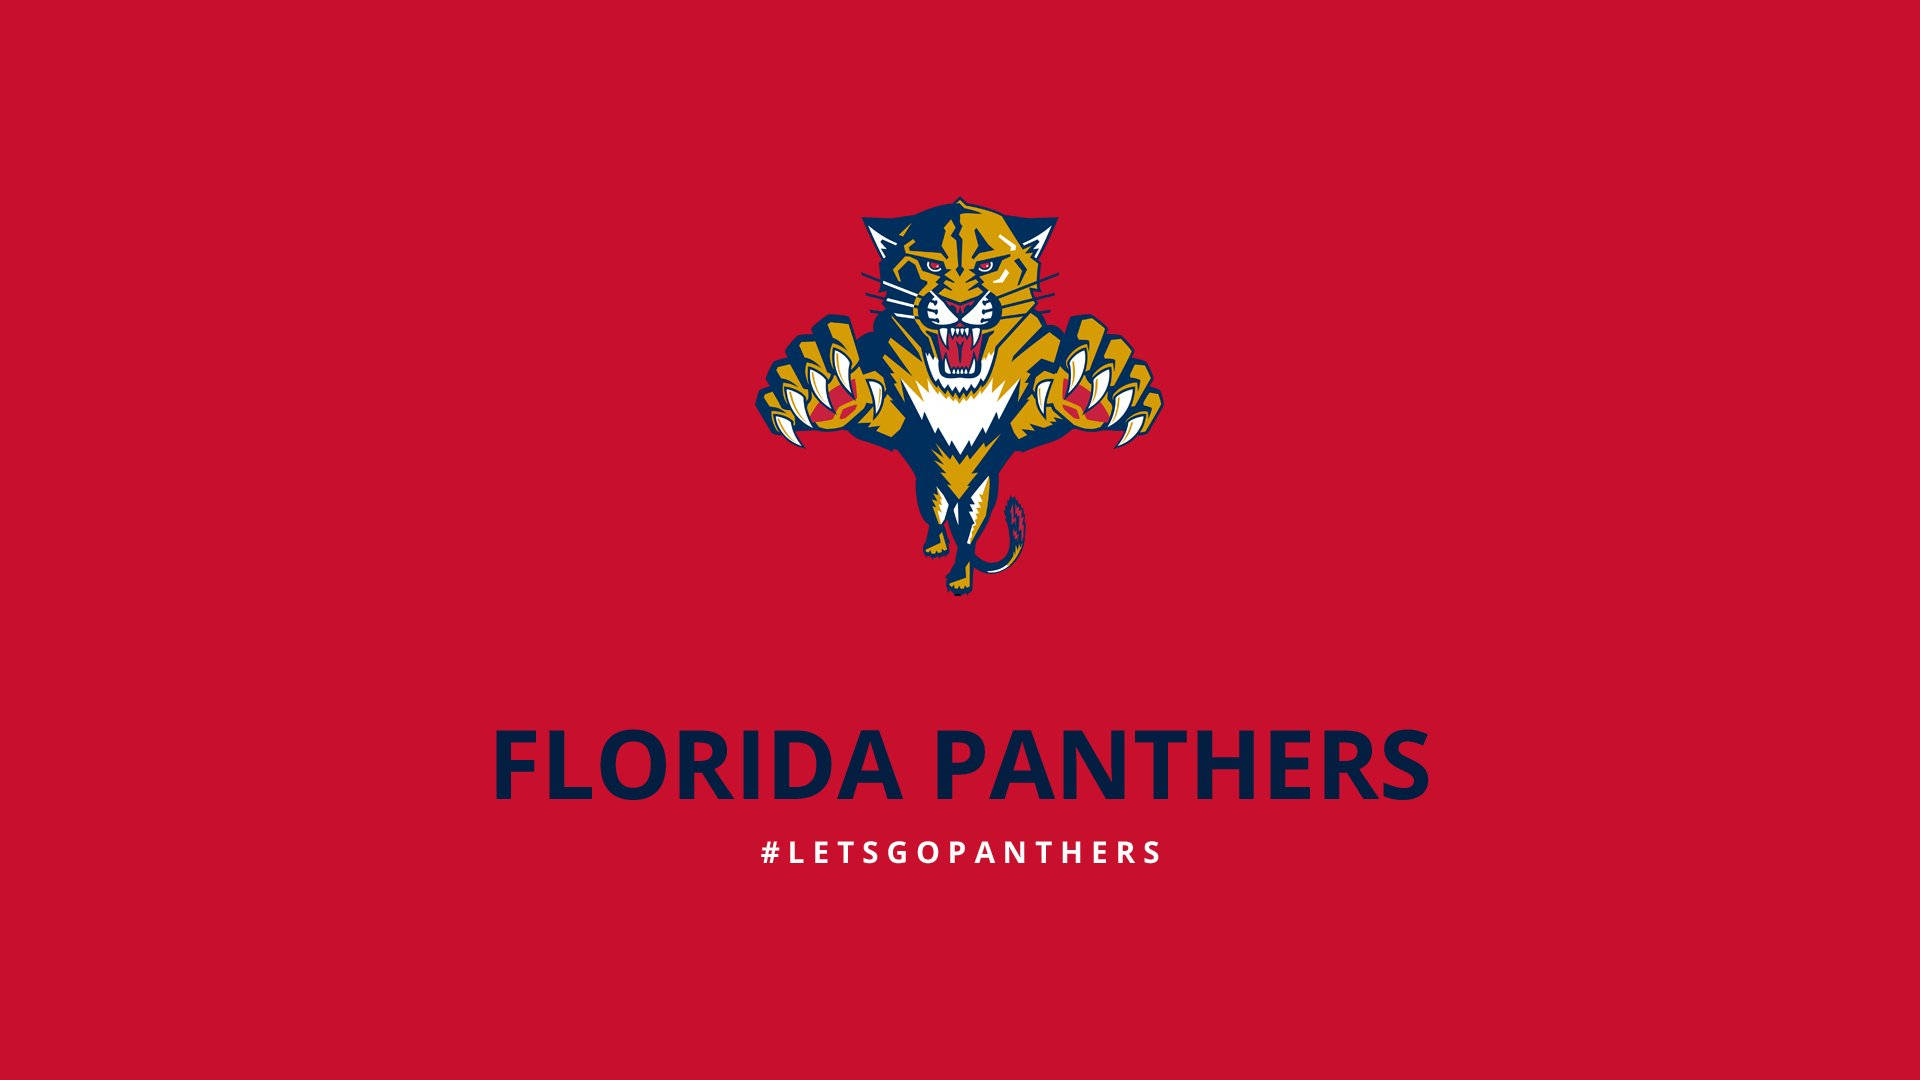 Exciting Action Moment In A Florida Panthers Game Background